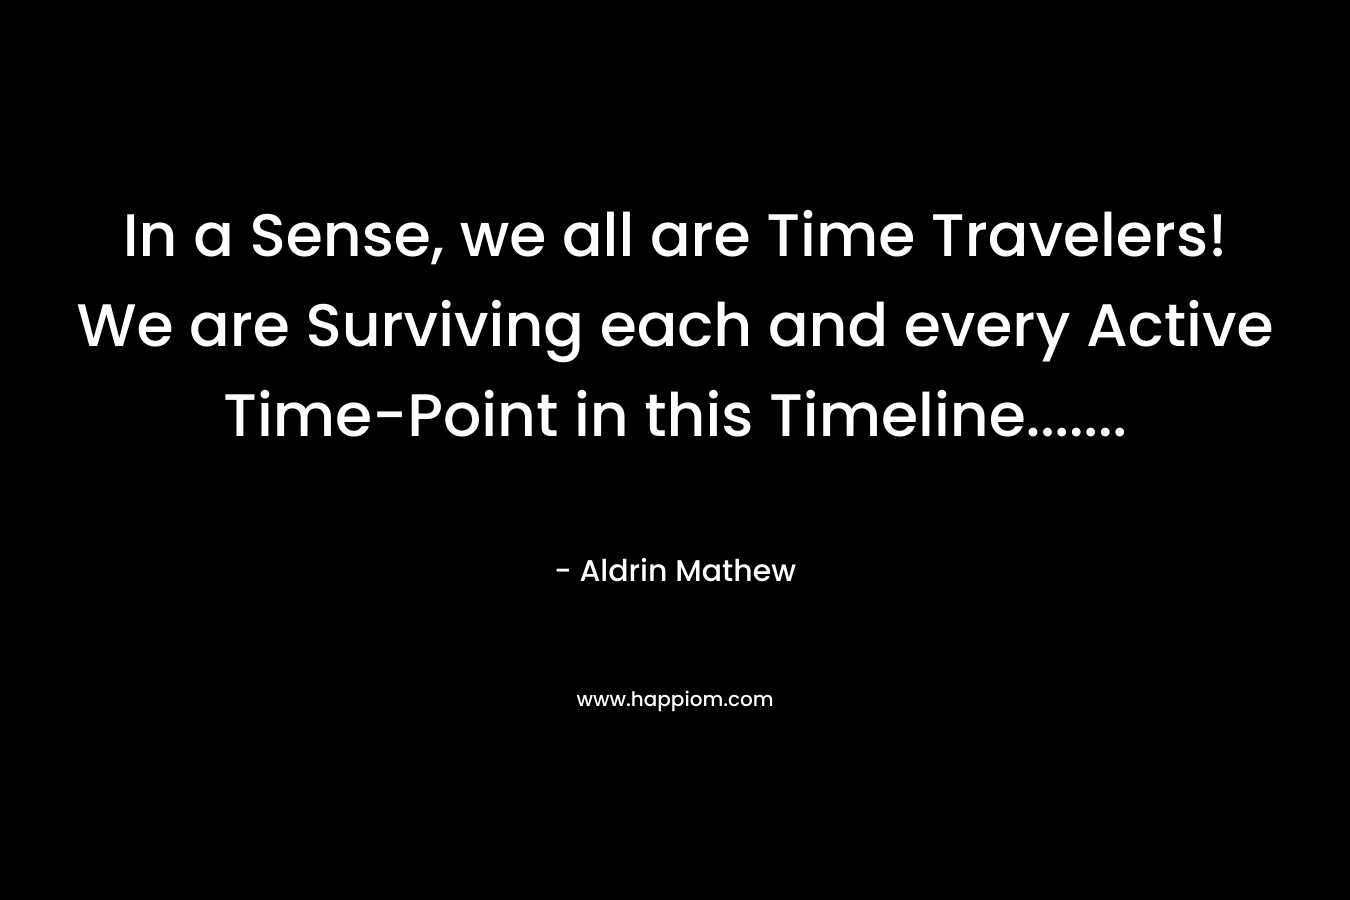 In a Sense, we all are Time Travelers! We are Surviving each and every Active Time-Point in this Timeline.......